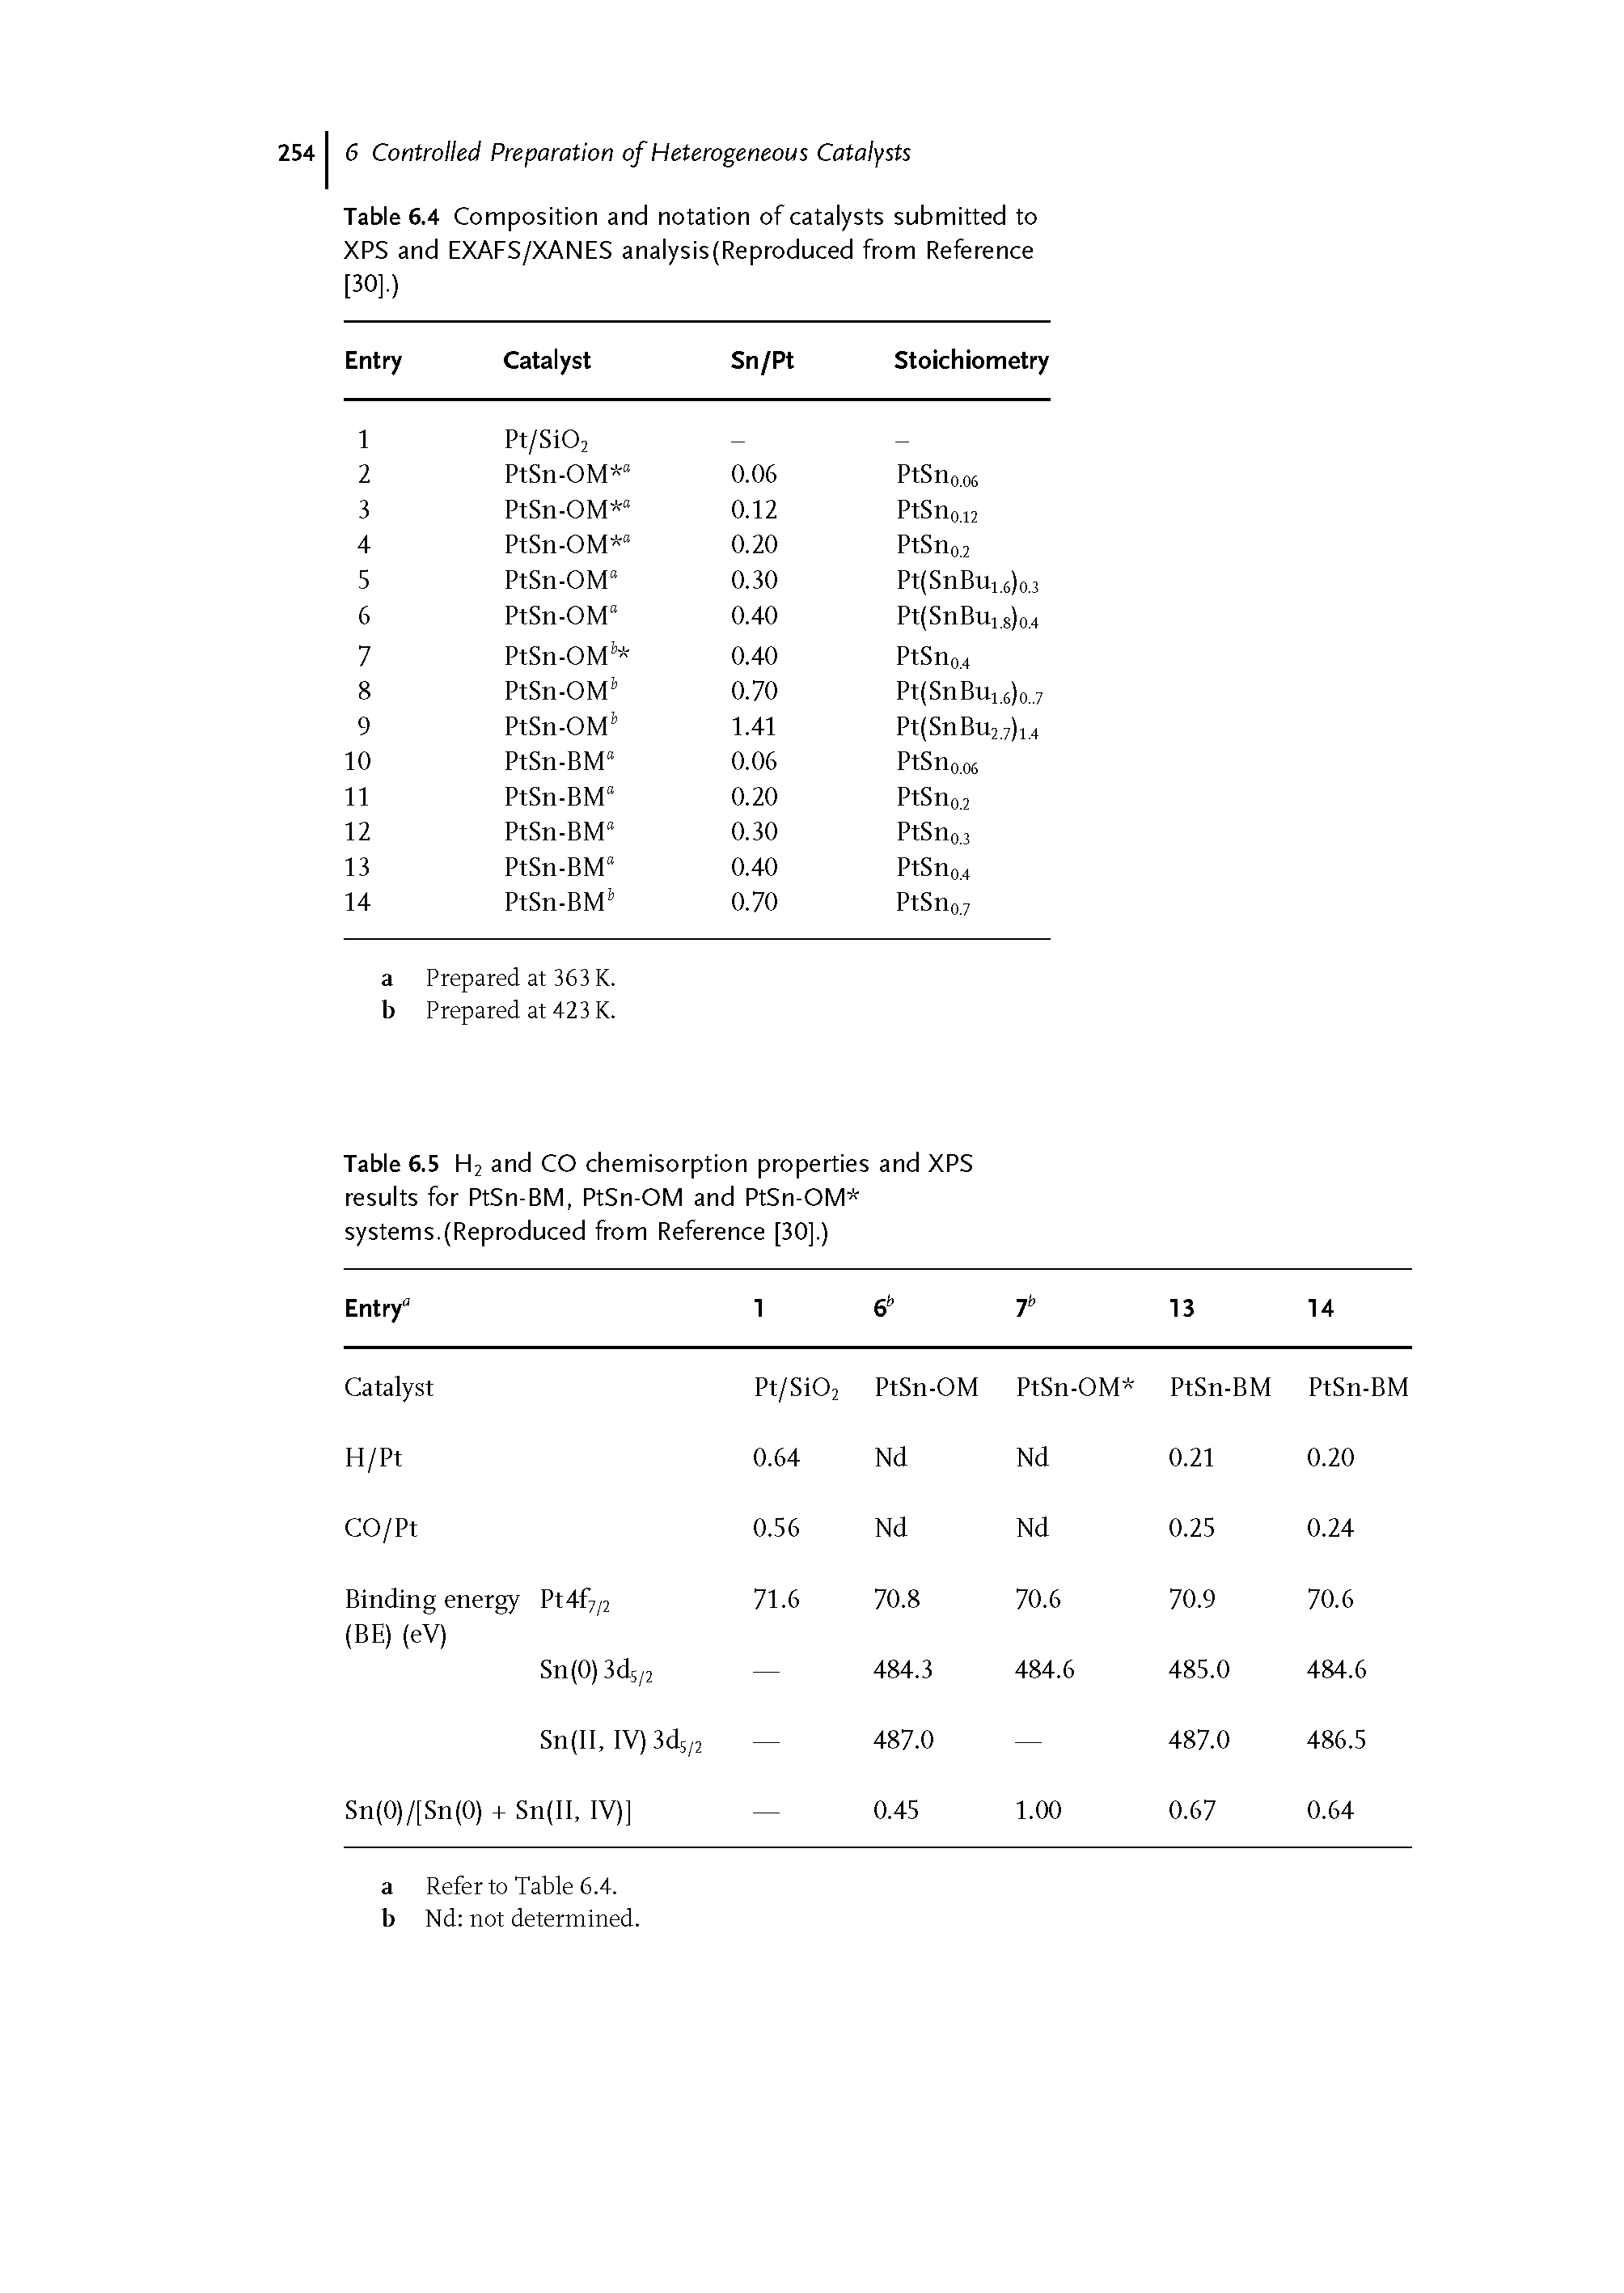 Table 6.5 H2 and CO chemisorption properties and XPS results for PtSn-BM, PtSn-OM and PtSn-OM systems.(Reproduced from Reference [30].)...